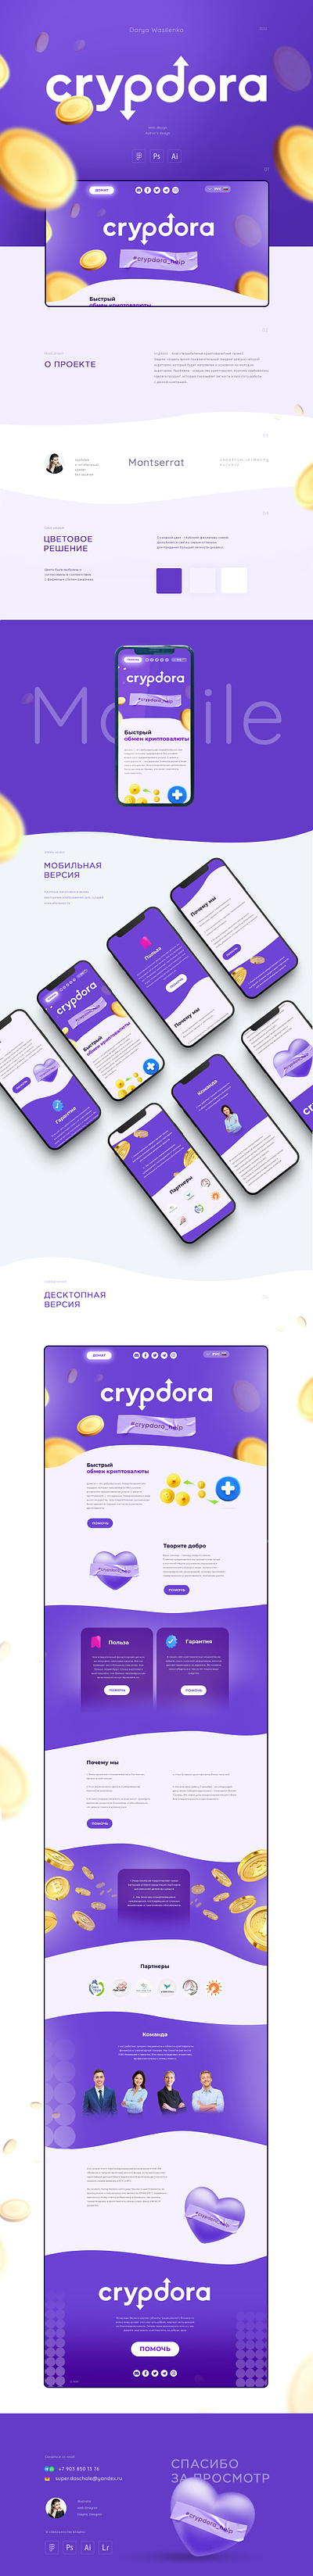 Landing page for "Crypdora" cryptocurrency project cryptocurrency graphic design landing page photoshop ui ux